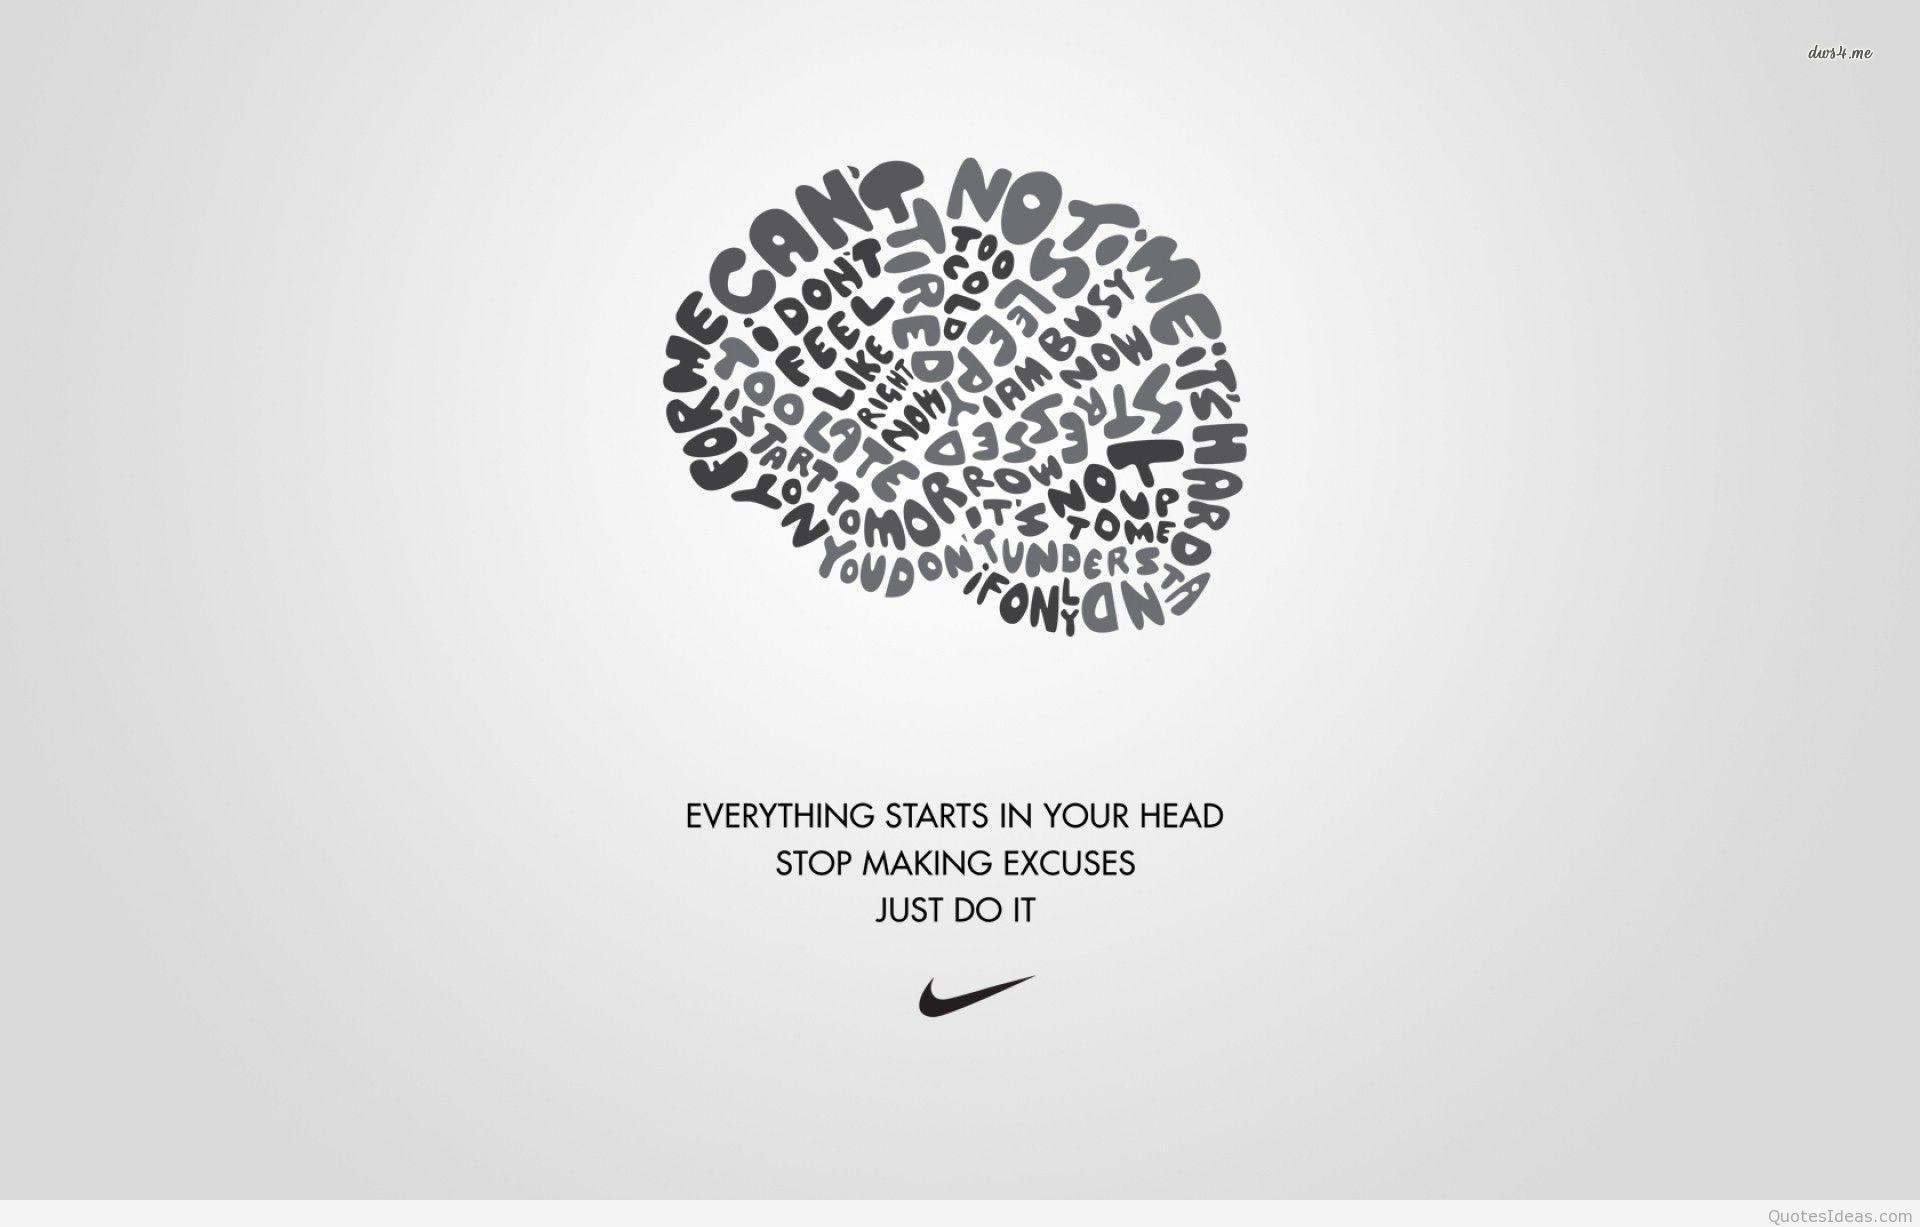 Just do it nike quote wallpaper